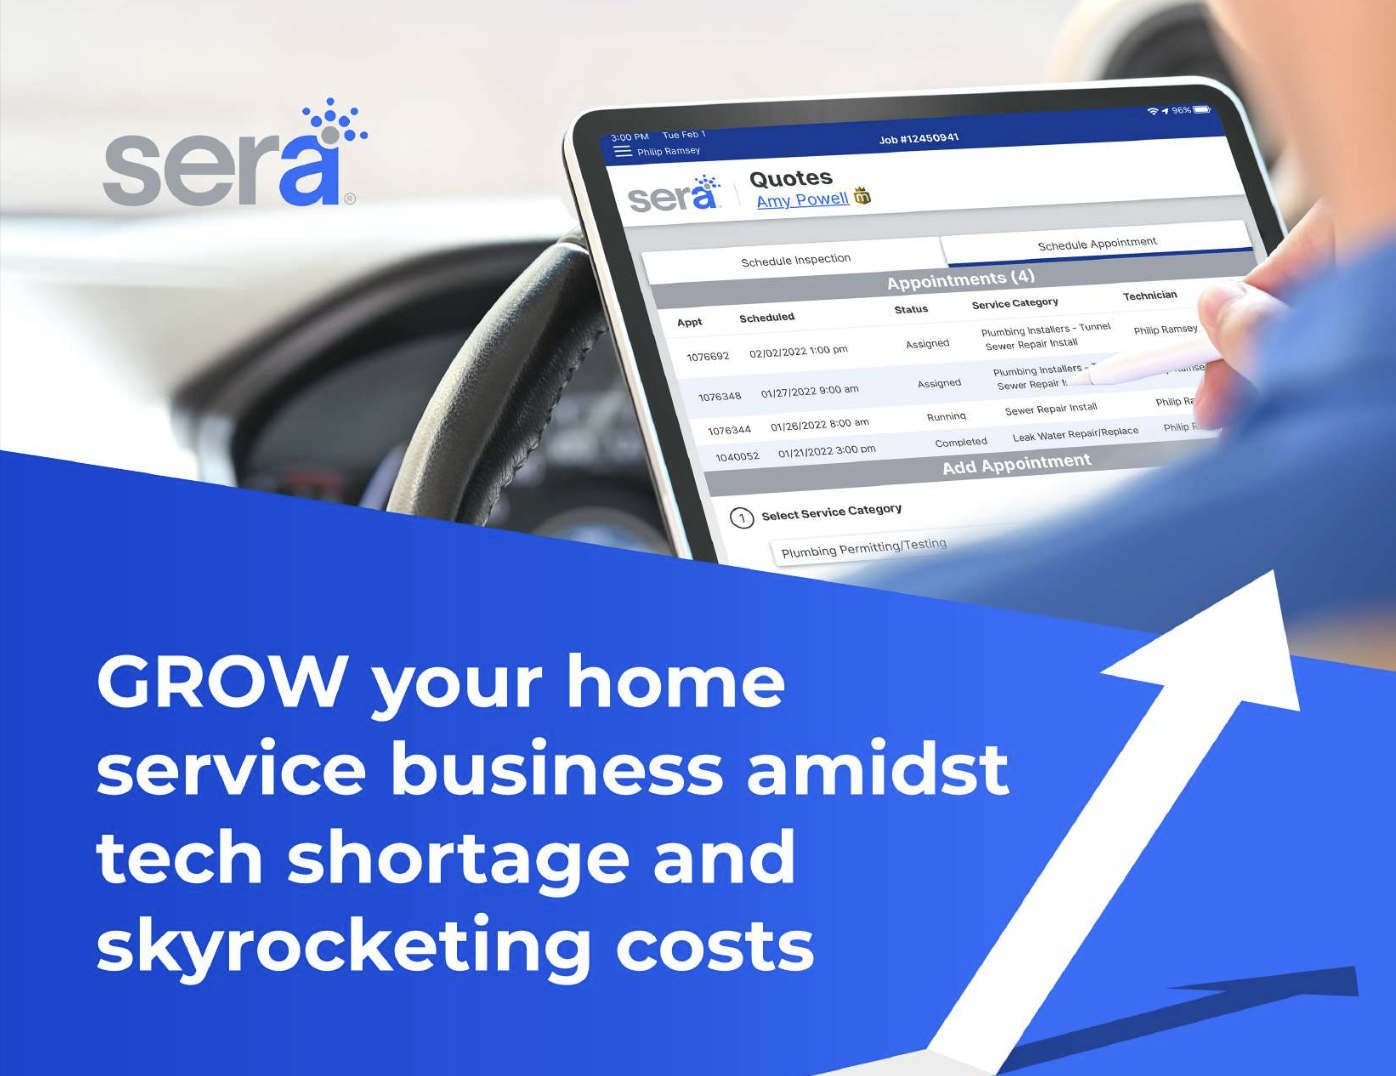 Grow your home service business amidst tech shortage and skyrocketing costs